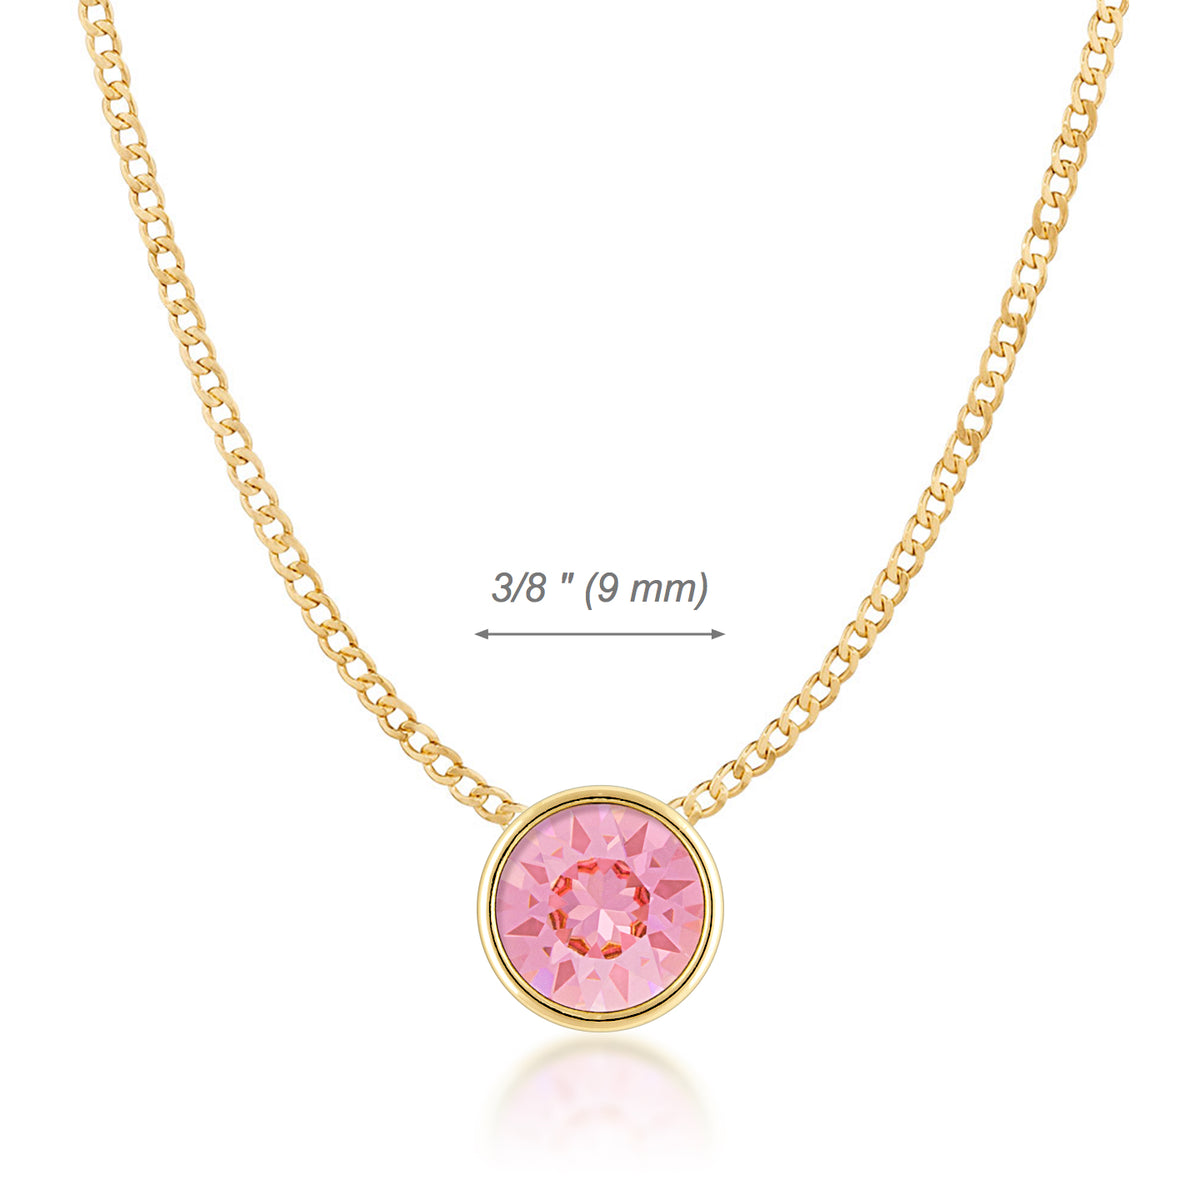 Harley Small Pendant Necklace with Pink Light Rose Round Crystals from Swarovski Gold Plated - Ed Heart